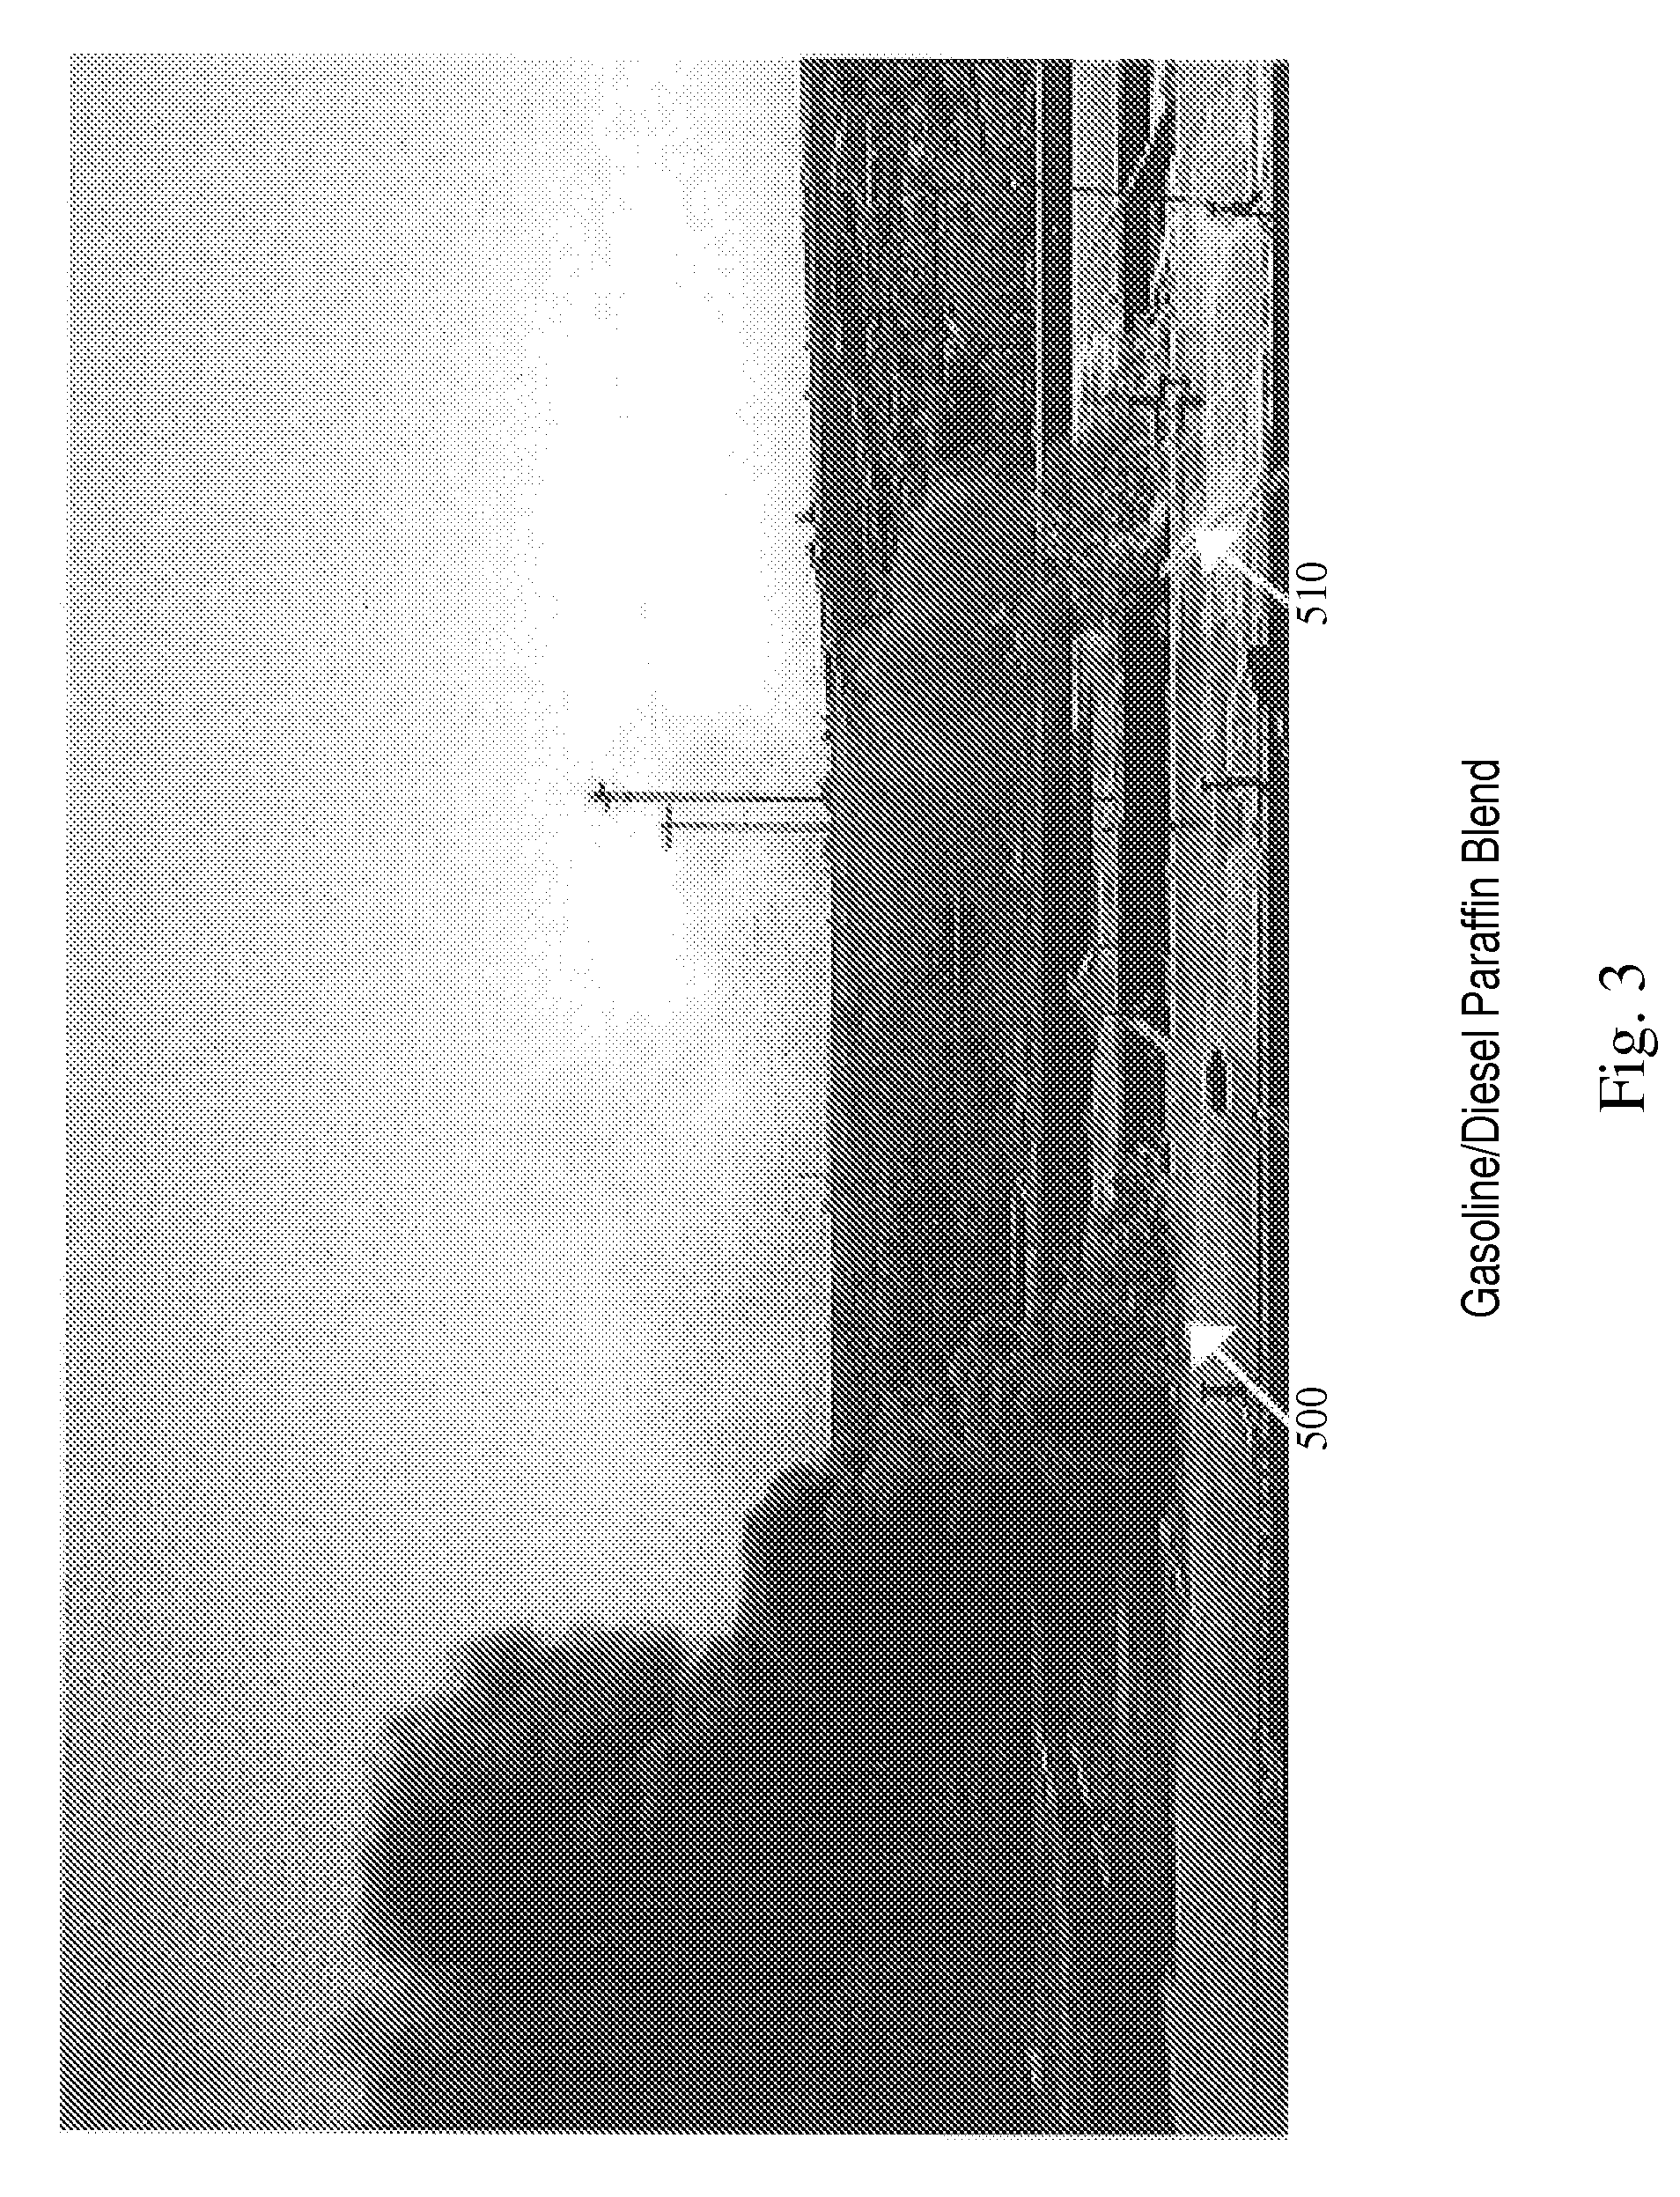 Firefighting training fluid and method for making same